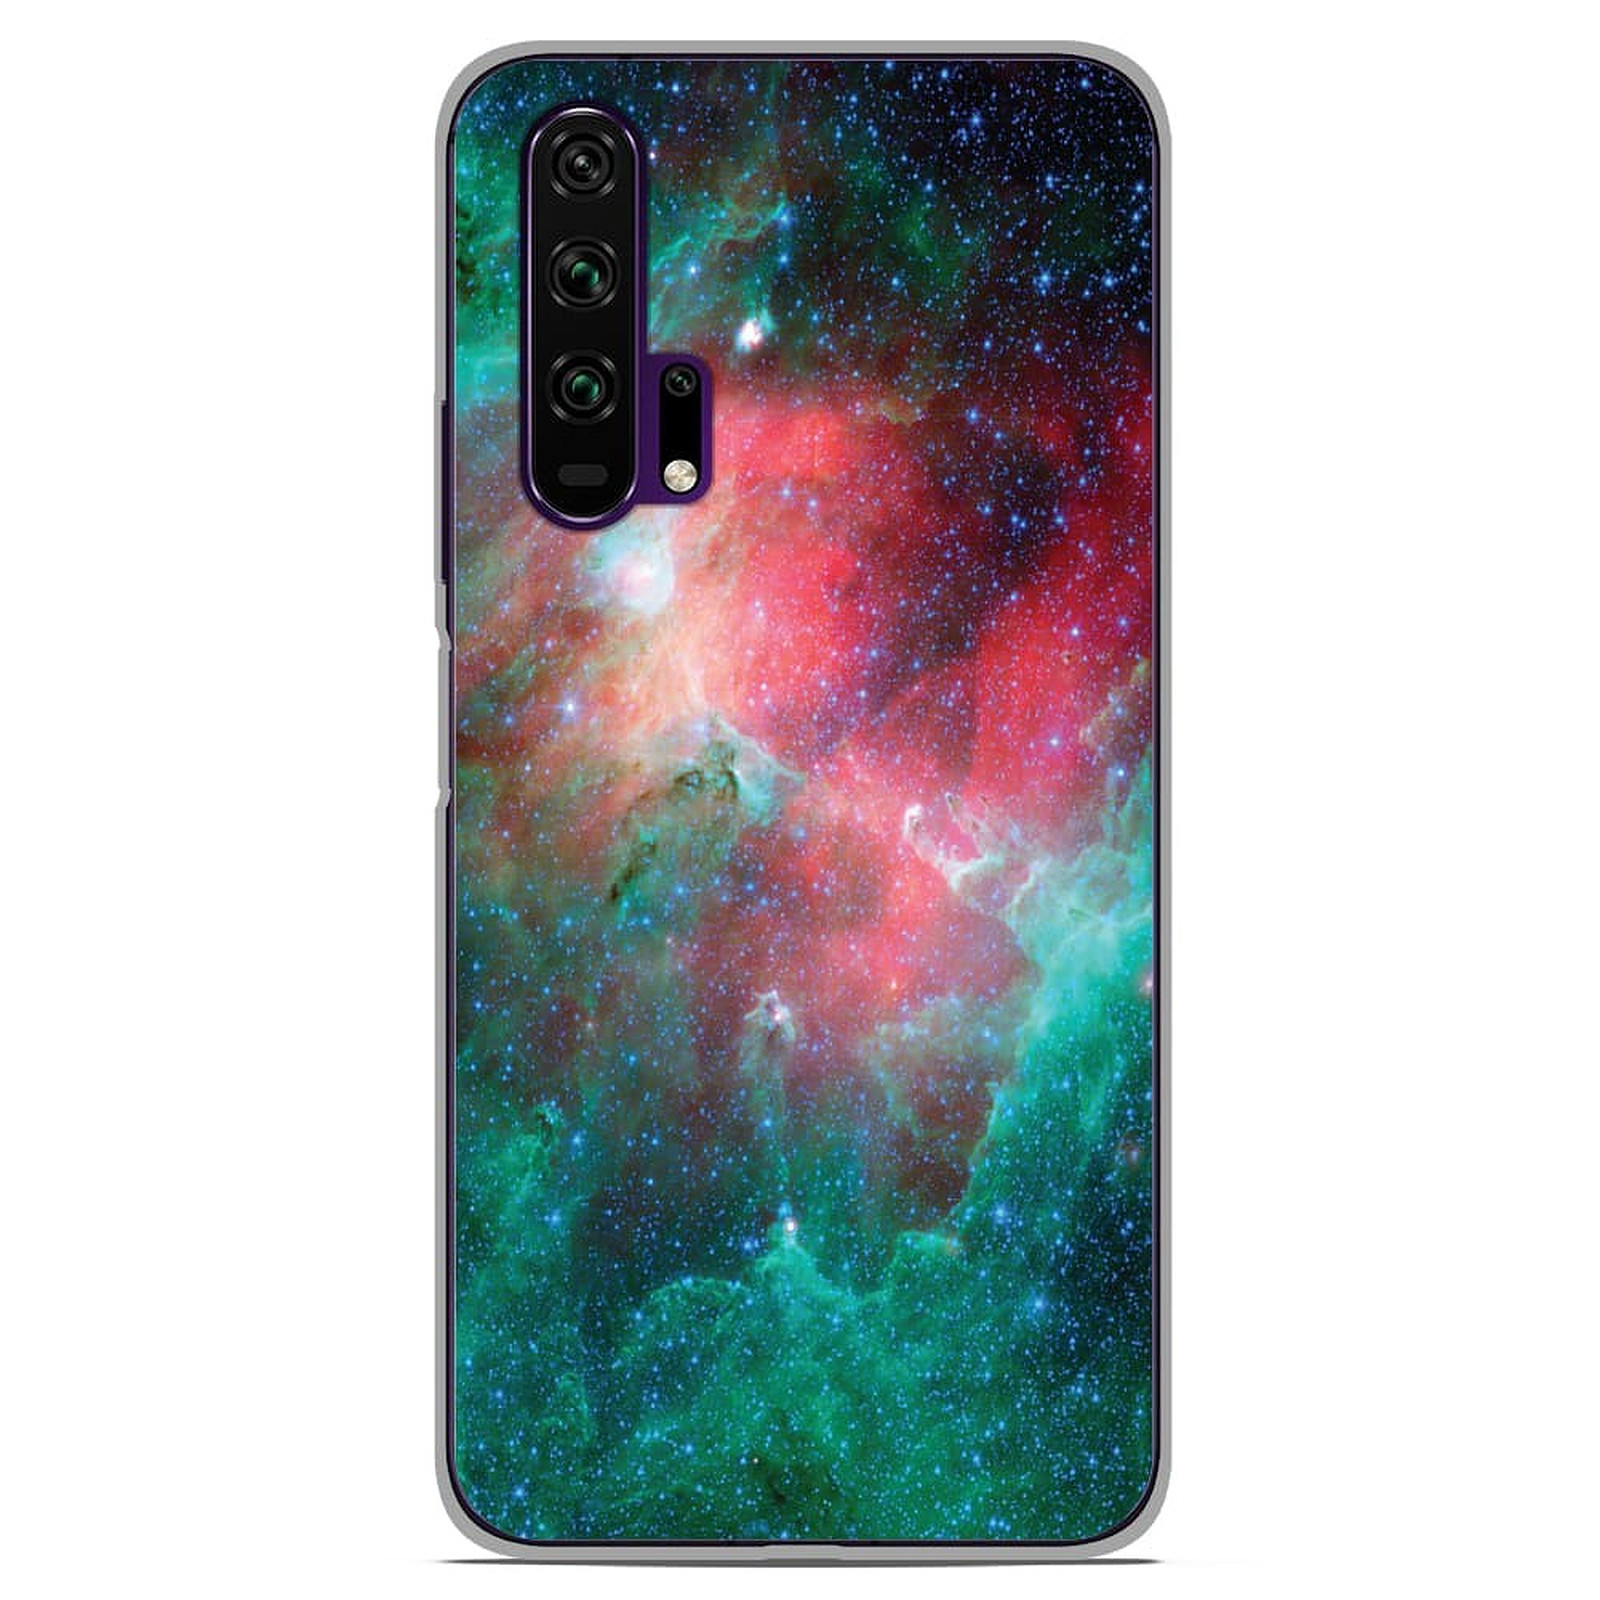 1001 Coques Coque silicone gel Huawei Honor 20 Pro motif Nebuleuse - Coque telephone 1001Coques